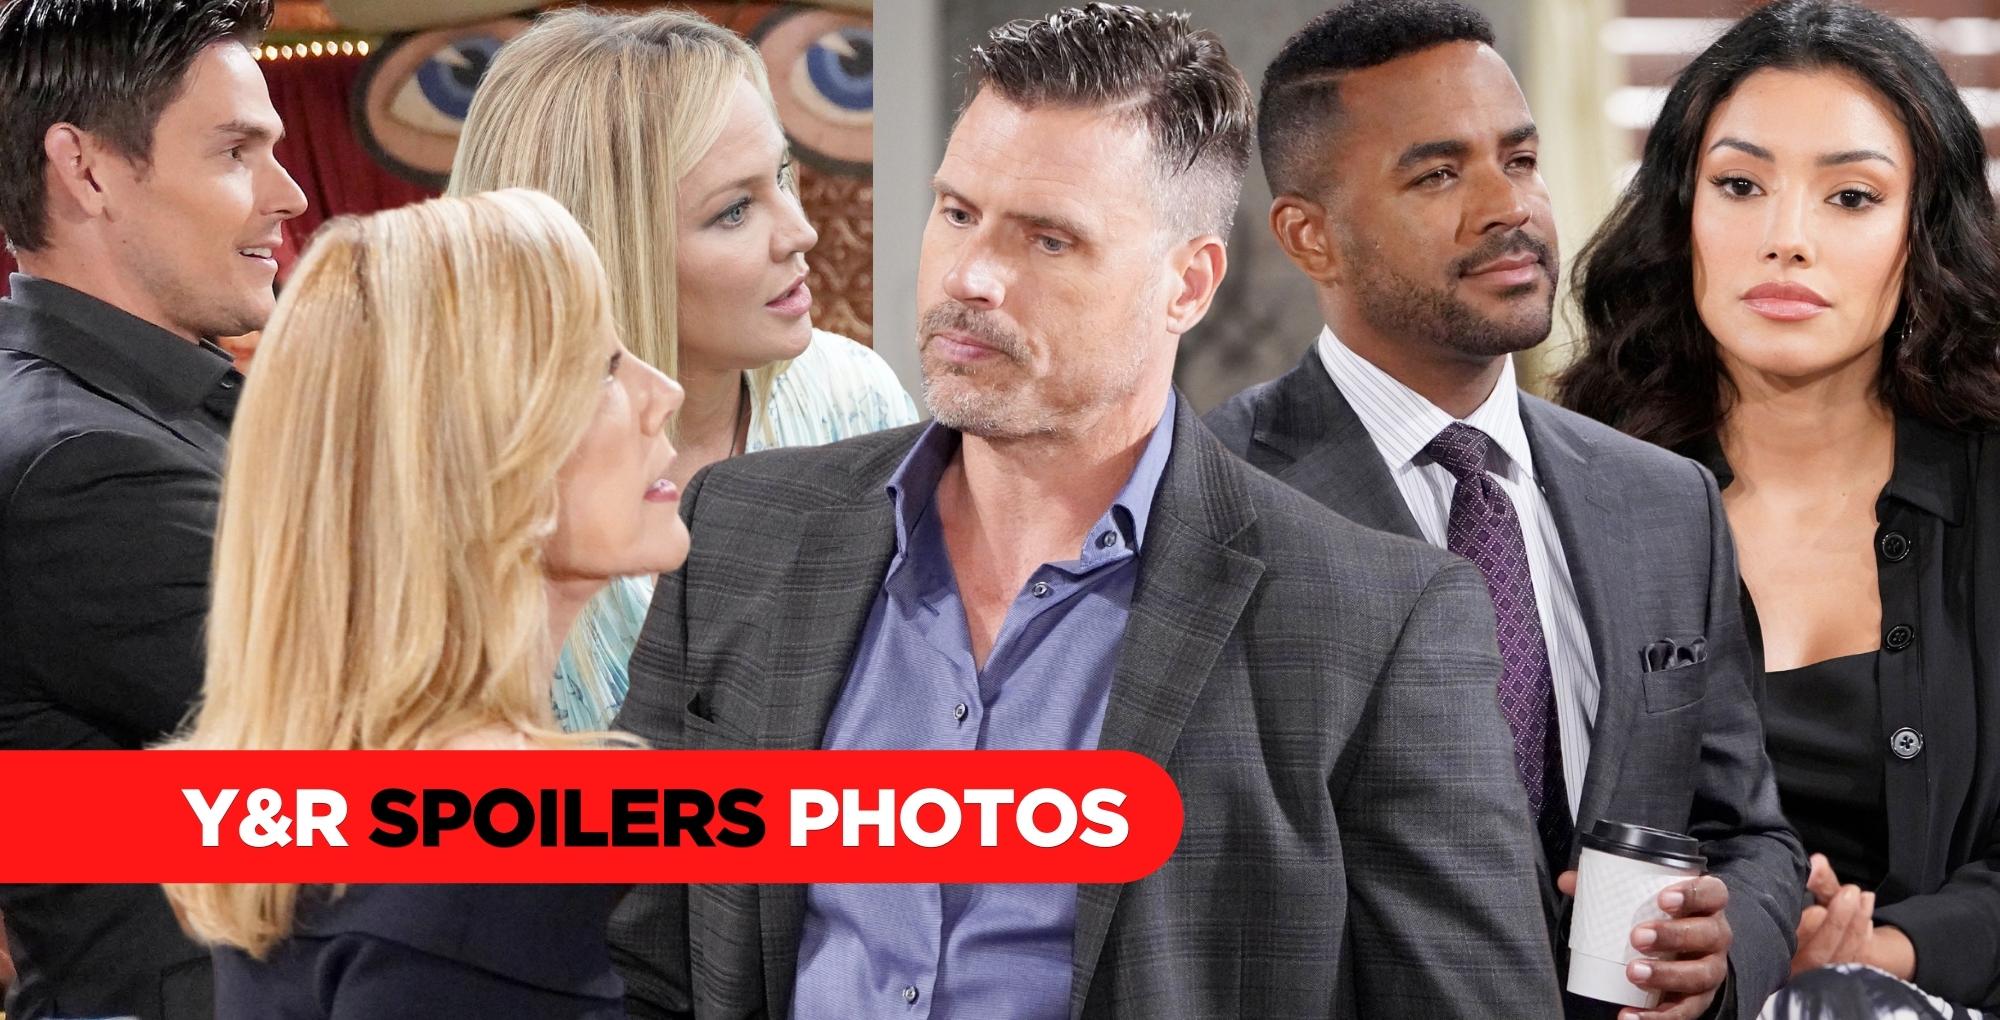 y&r spoilers photos for wednesday, august 30, 2023, collage of photos.